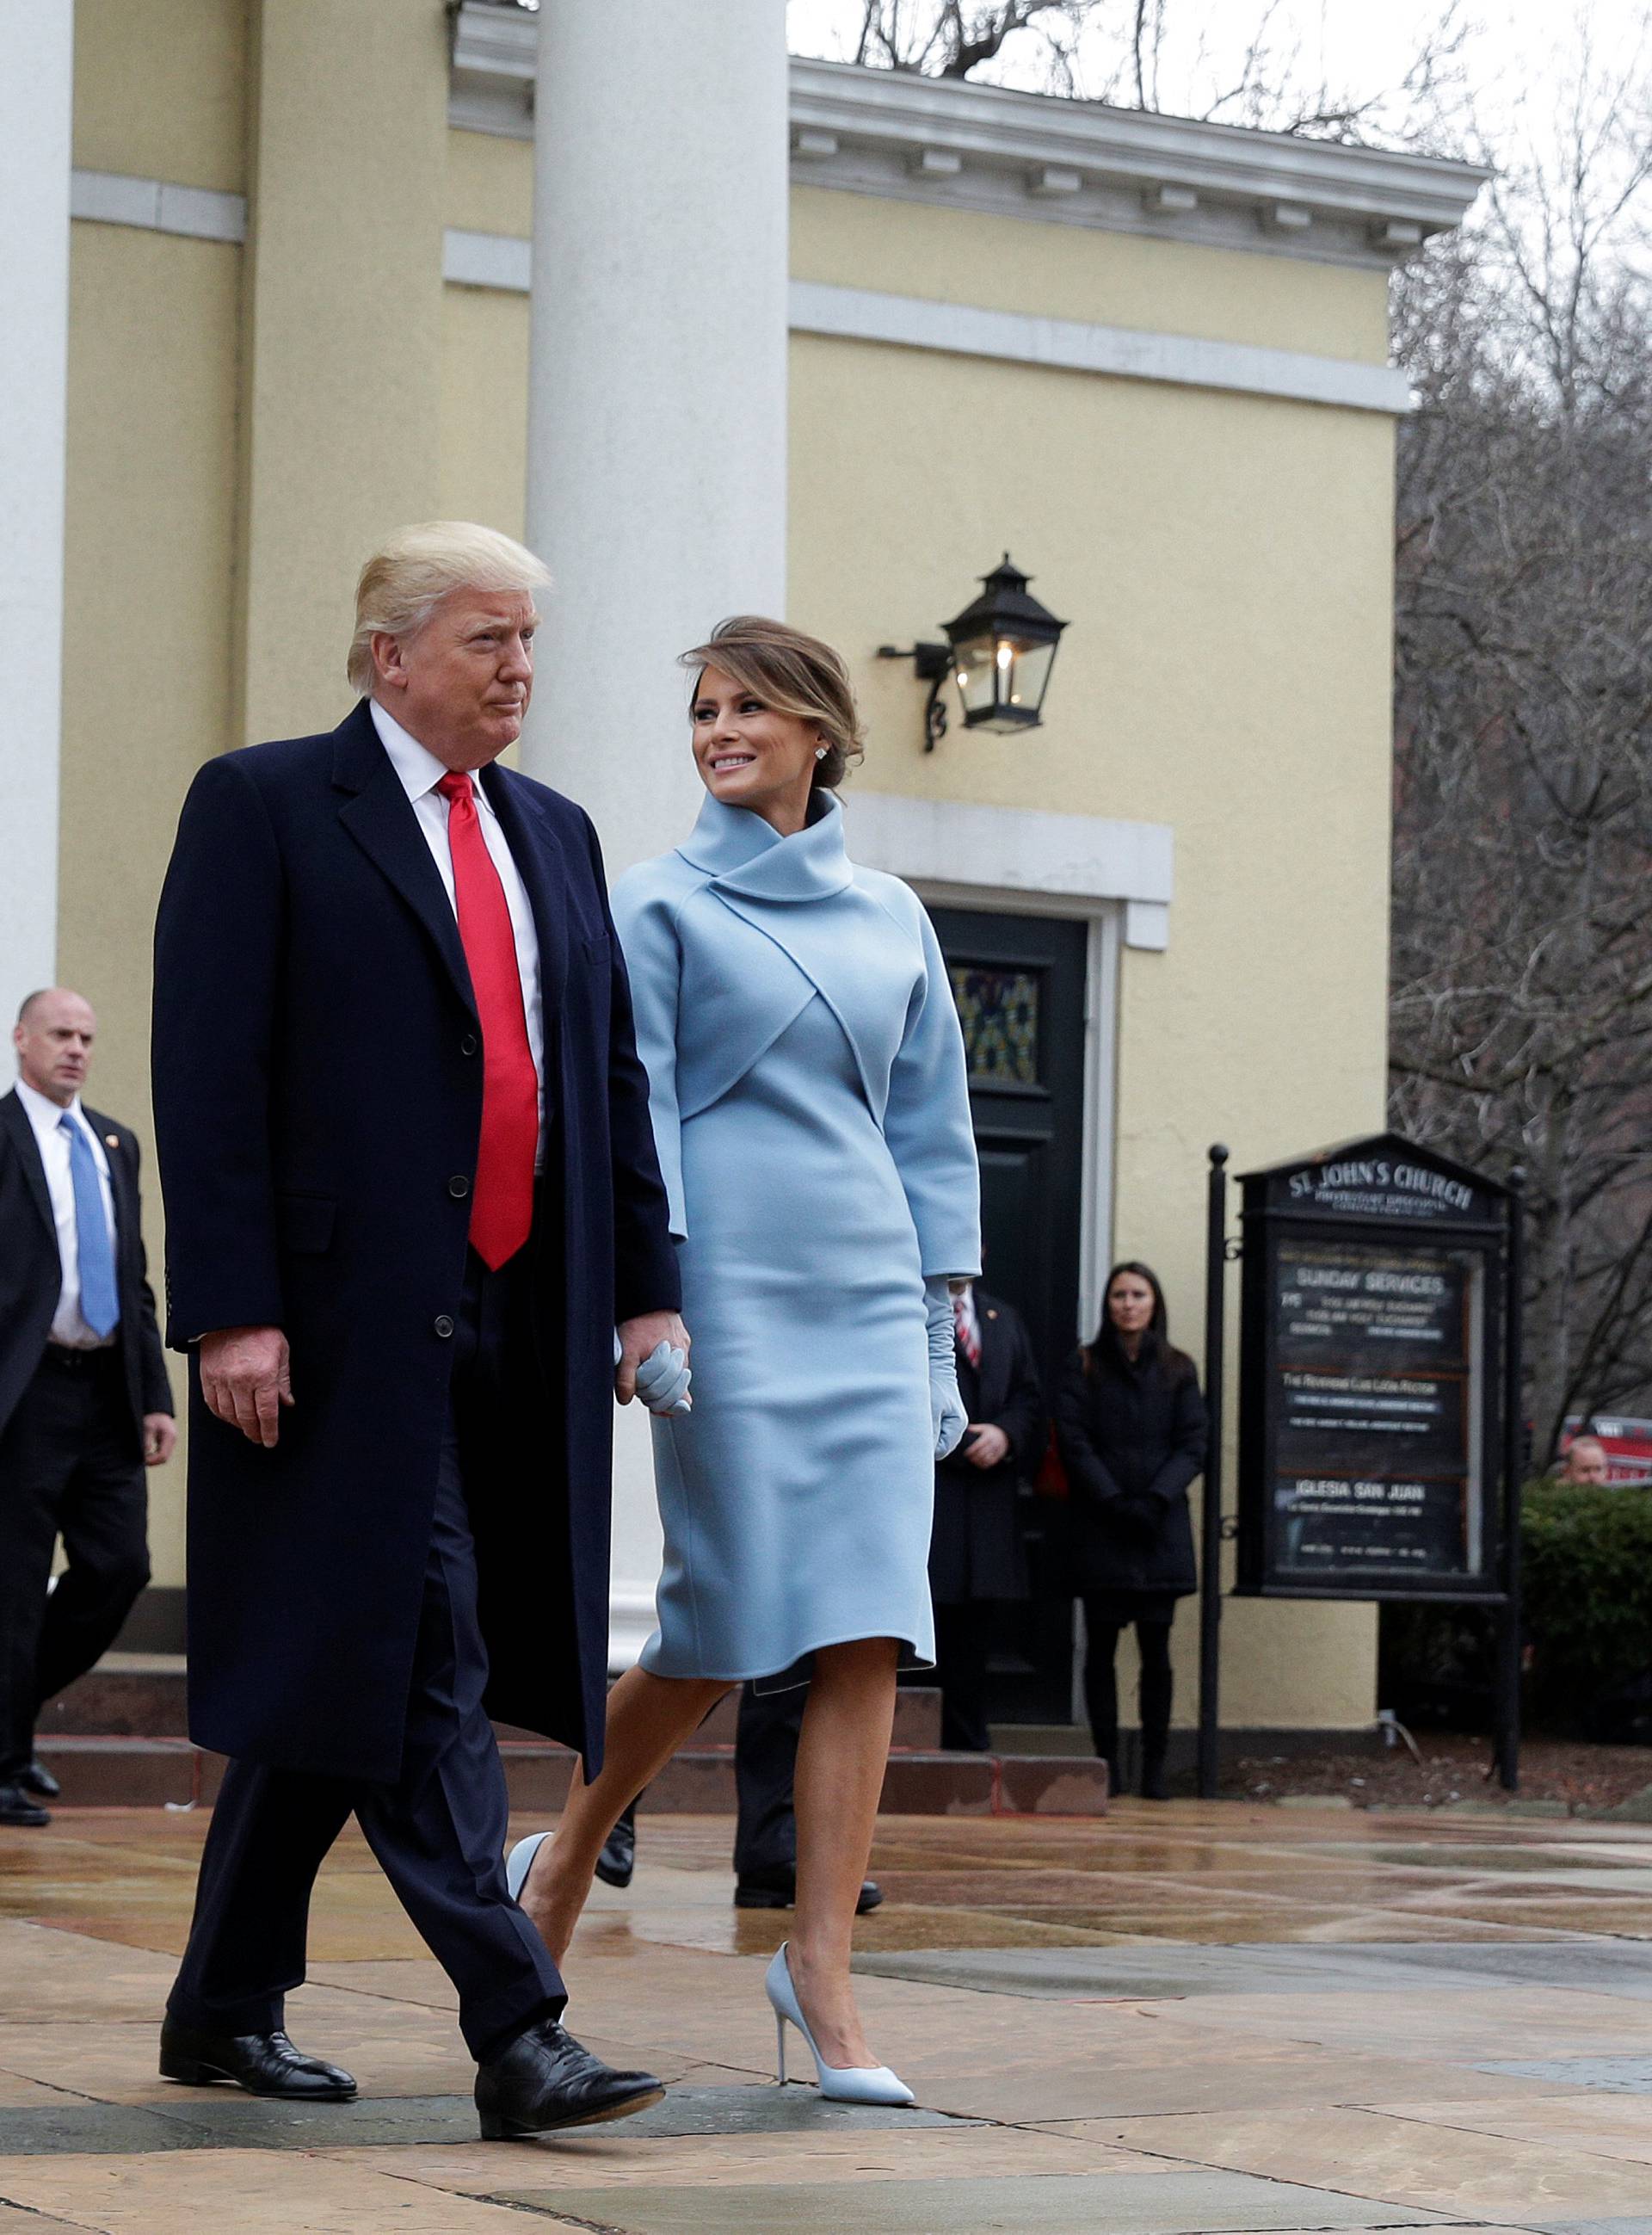 President-elect Donald Trump and his wife Melania depart from services at St. John's Church during his inauguration in Washington.